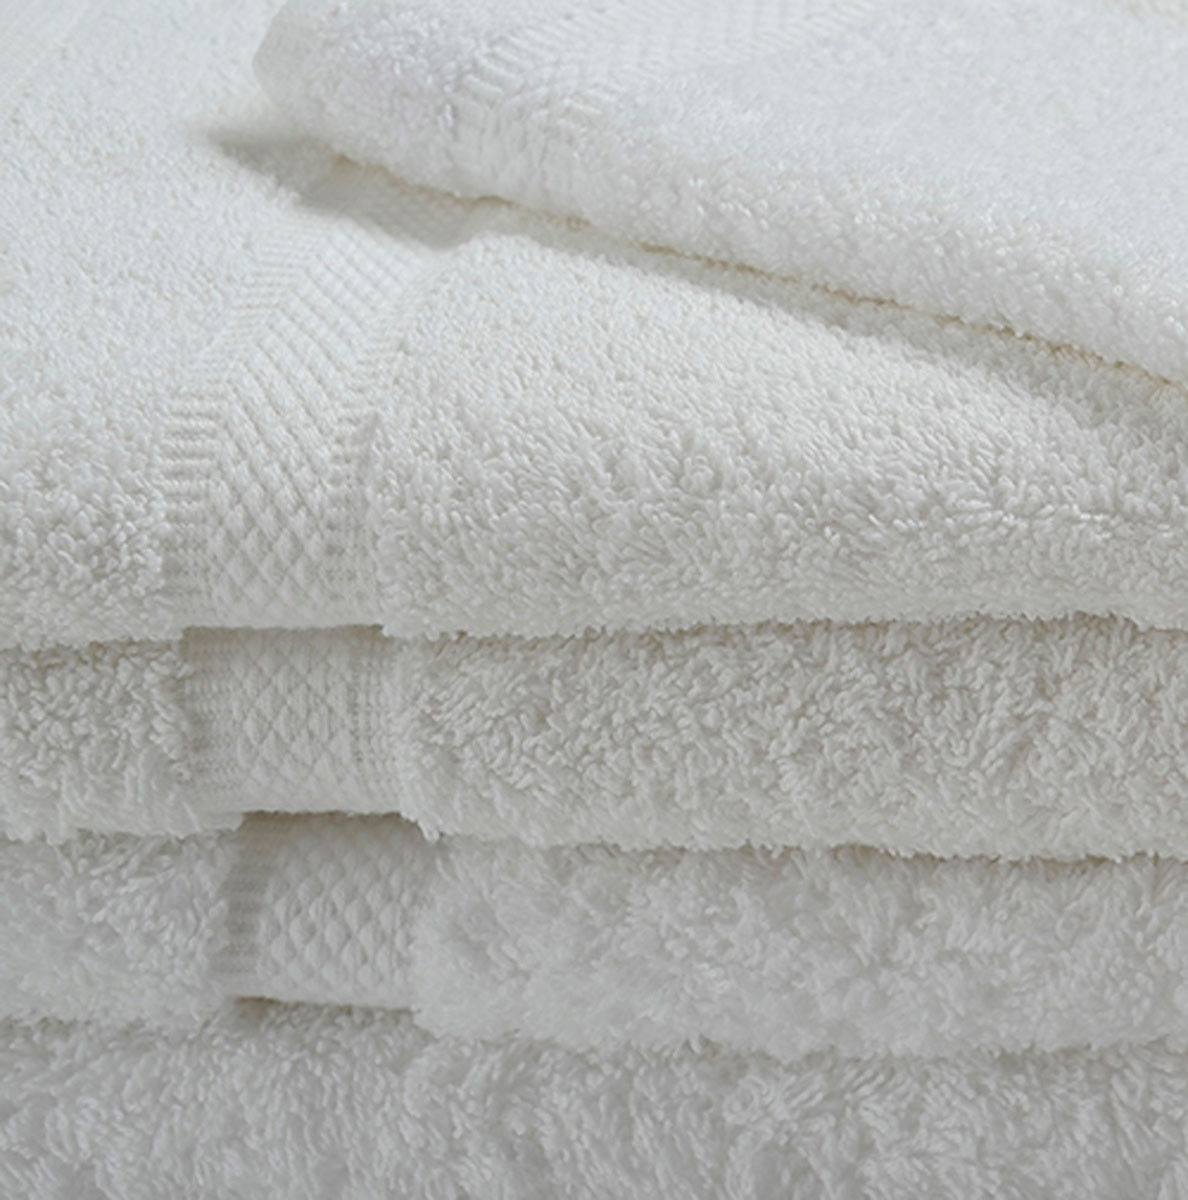 What's the best way to feel the true softness and texture of Oxford Imperiale Towels?